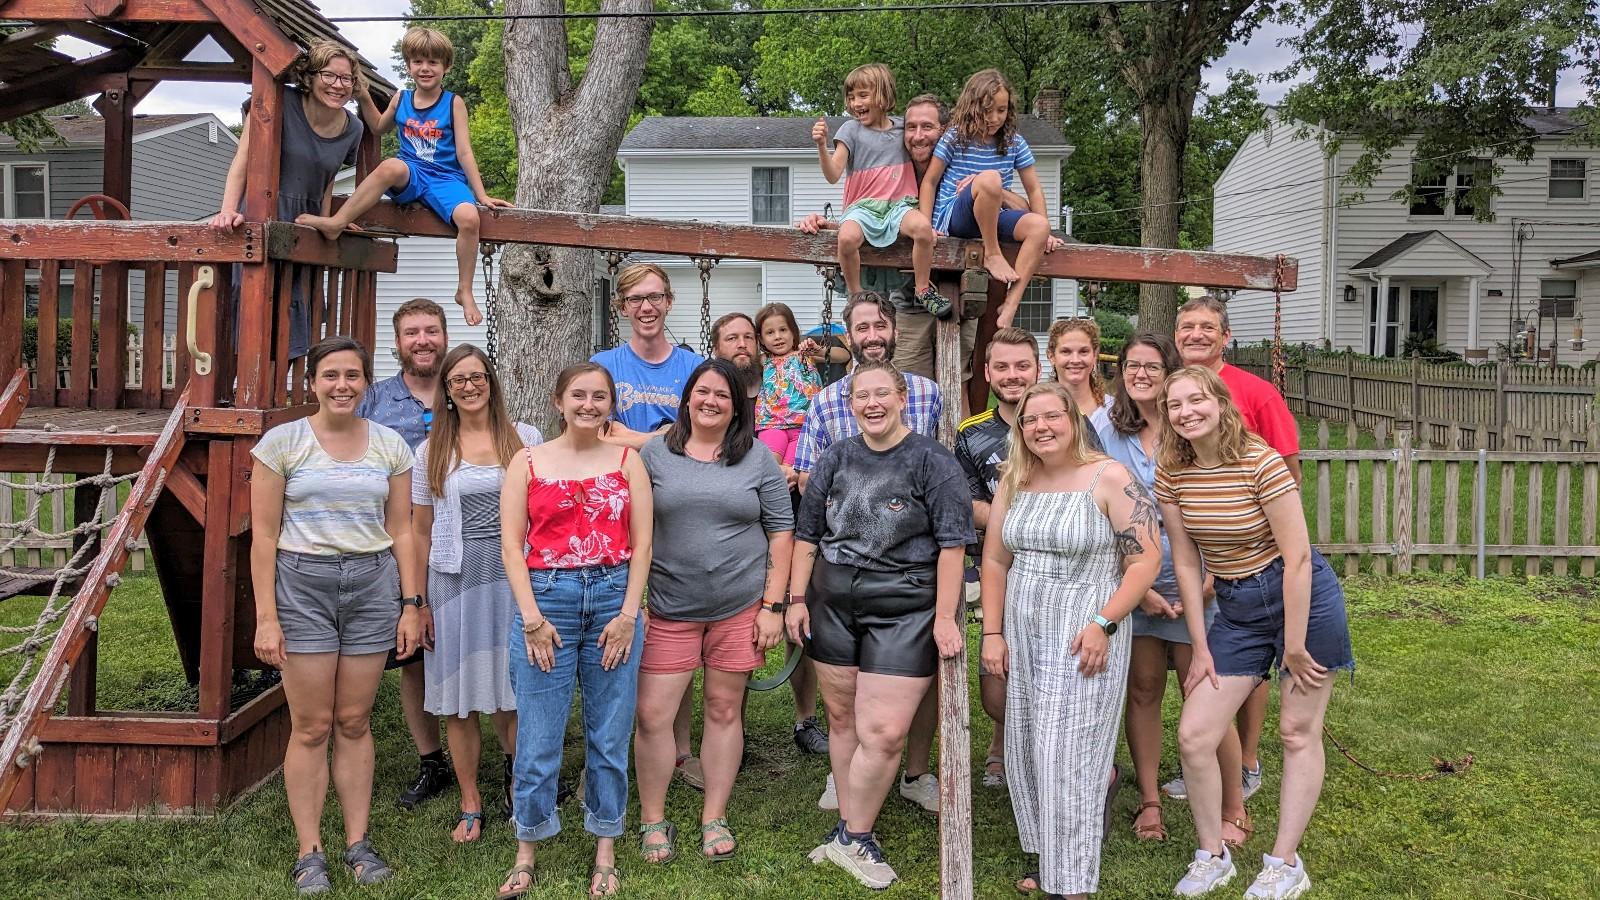 Group photo of AELers and families in front of a backyard swingset